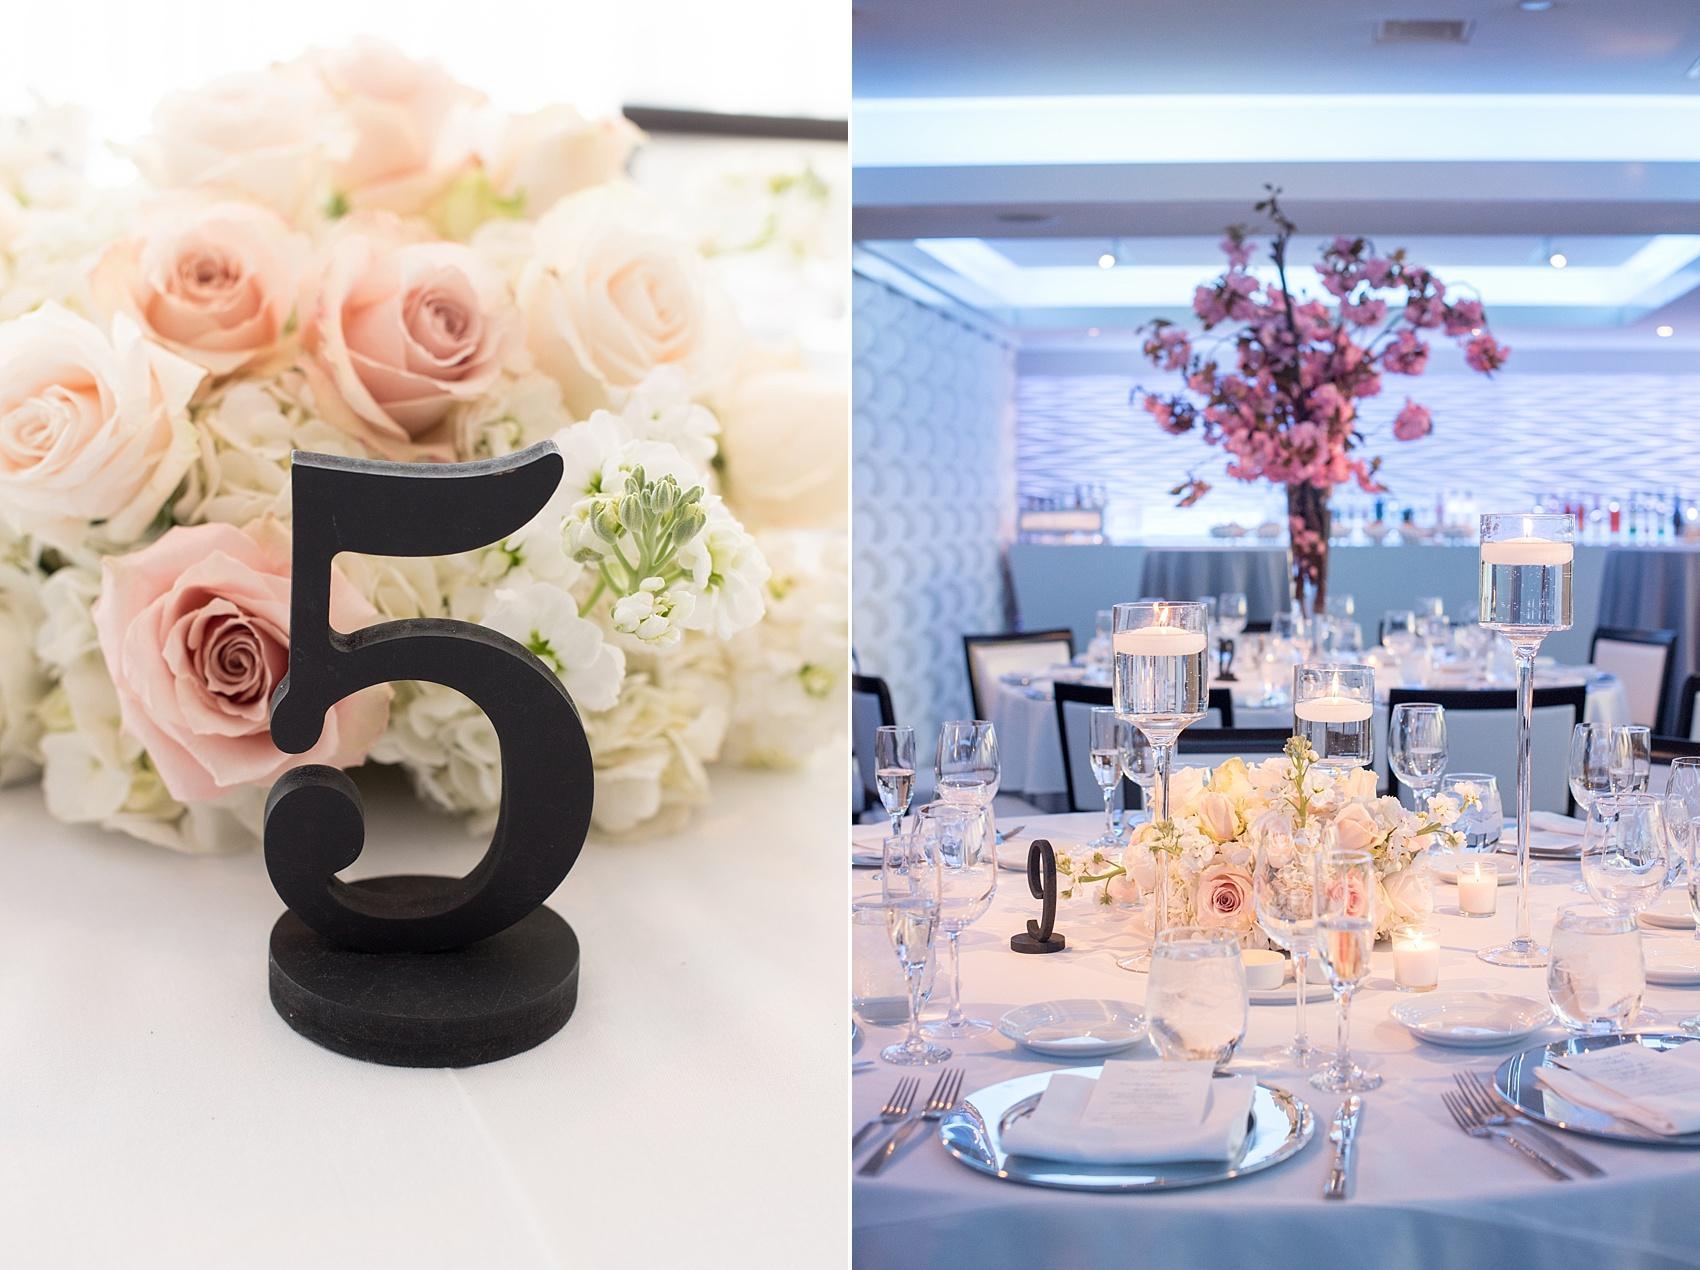 Photos by Mikkel Paige Photography for a wedding at Harbor Club on Long Island. Modern sleek reception tables decorated with cherry blossoms centerpieces and roses and hydrangeas.